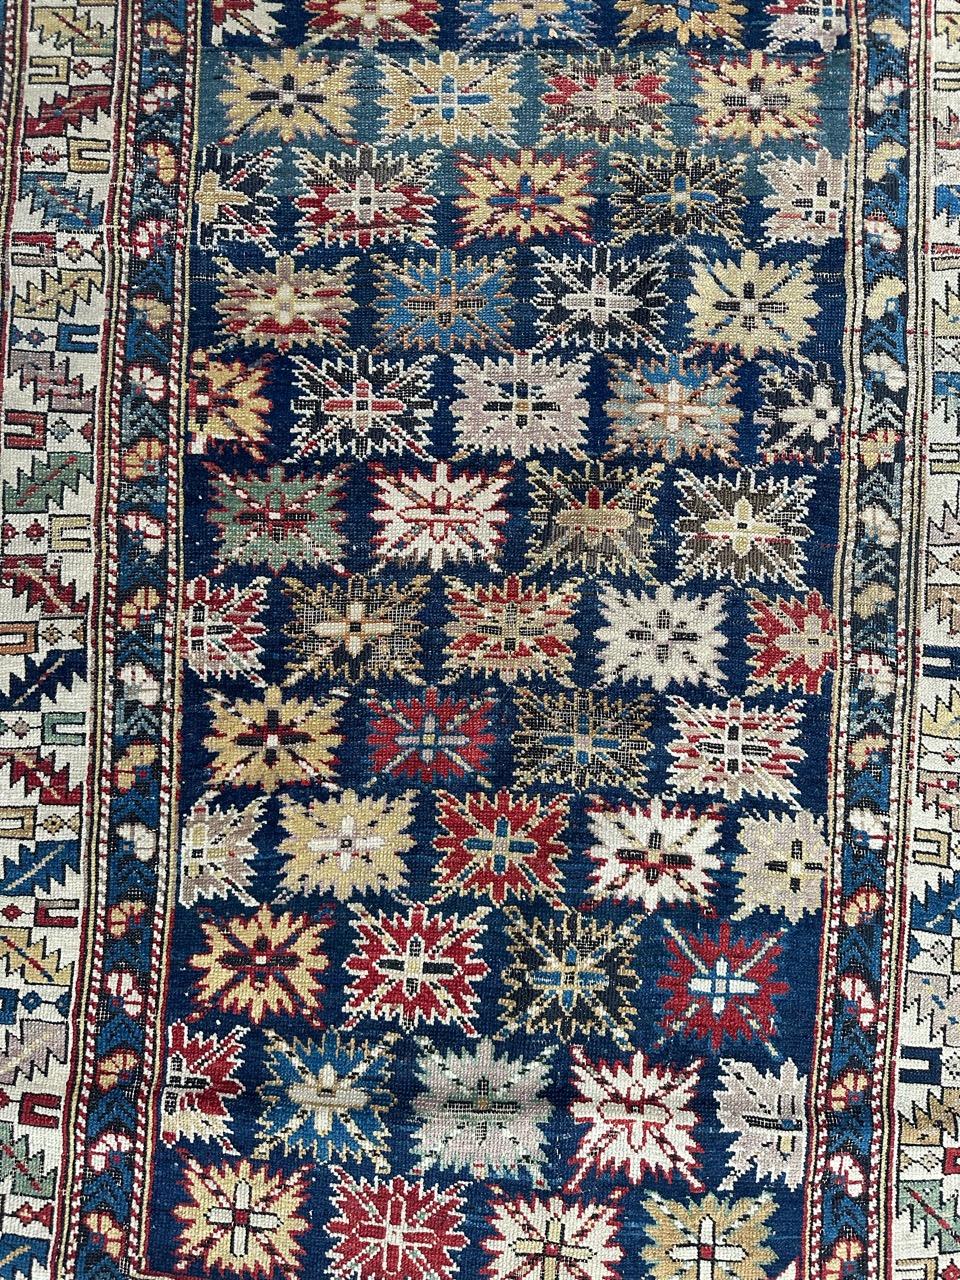 Beautiful antique Caucasian Shirwan carpet from the late 19th century, entirely hand-knotted in wool on a wool foundation, featuring natural and vegetable dyes. The carpet's central motif showcases stylized star-like patterns filling the field with